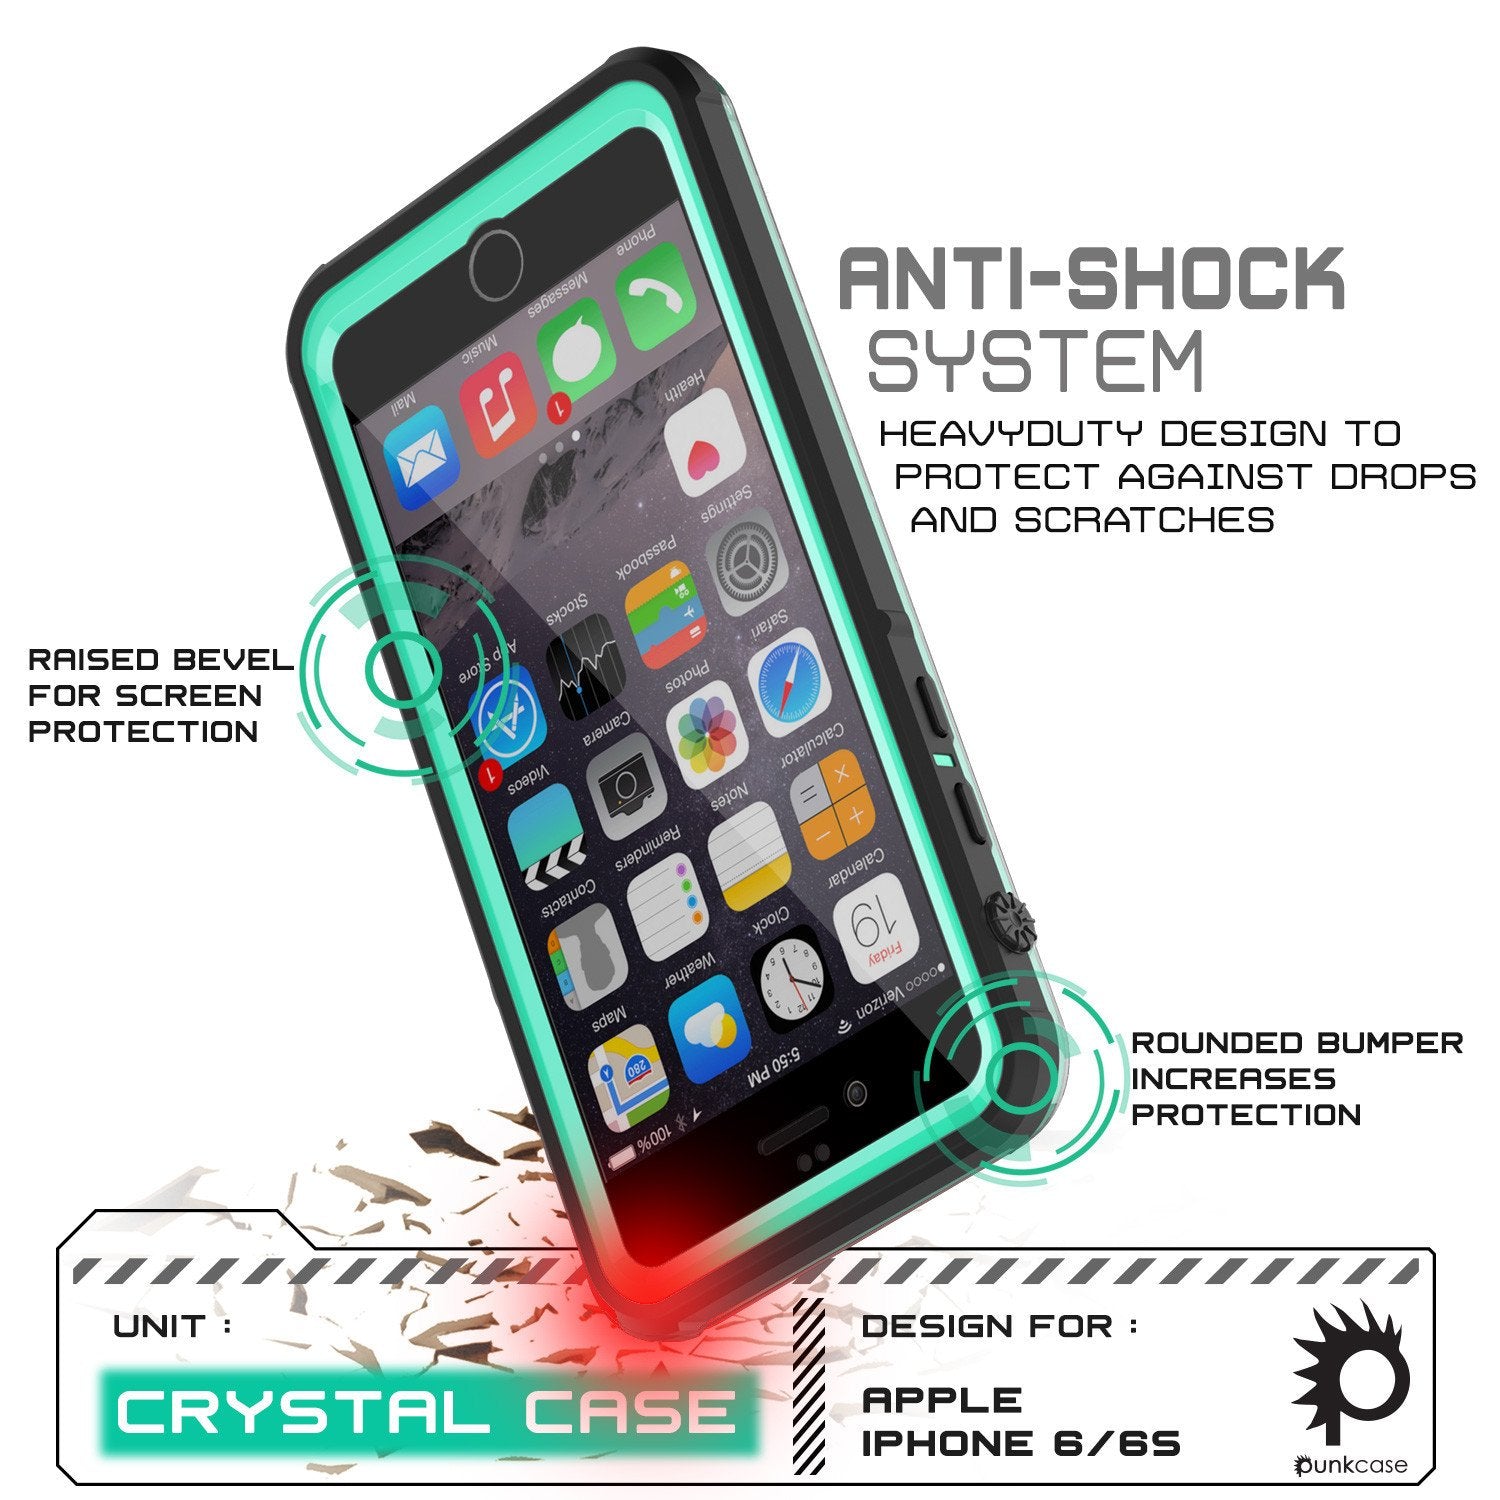 iPhone 6+/6S+ Plus Waterproof Case, PUNKcase CRYSTAL Teal W/ Attached Screen Protector | Warranty